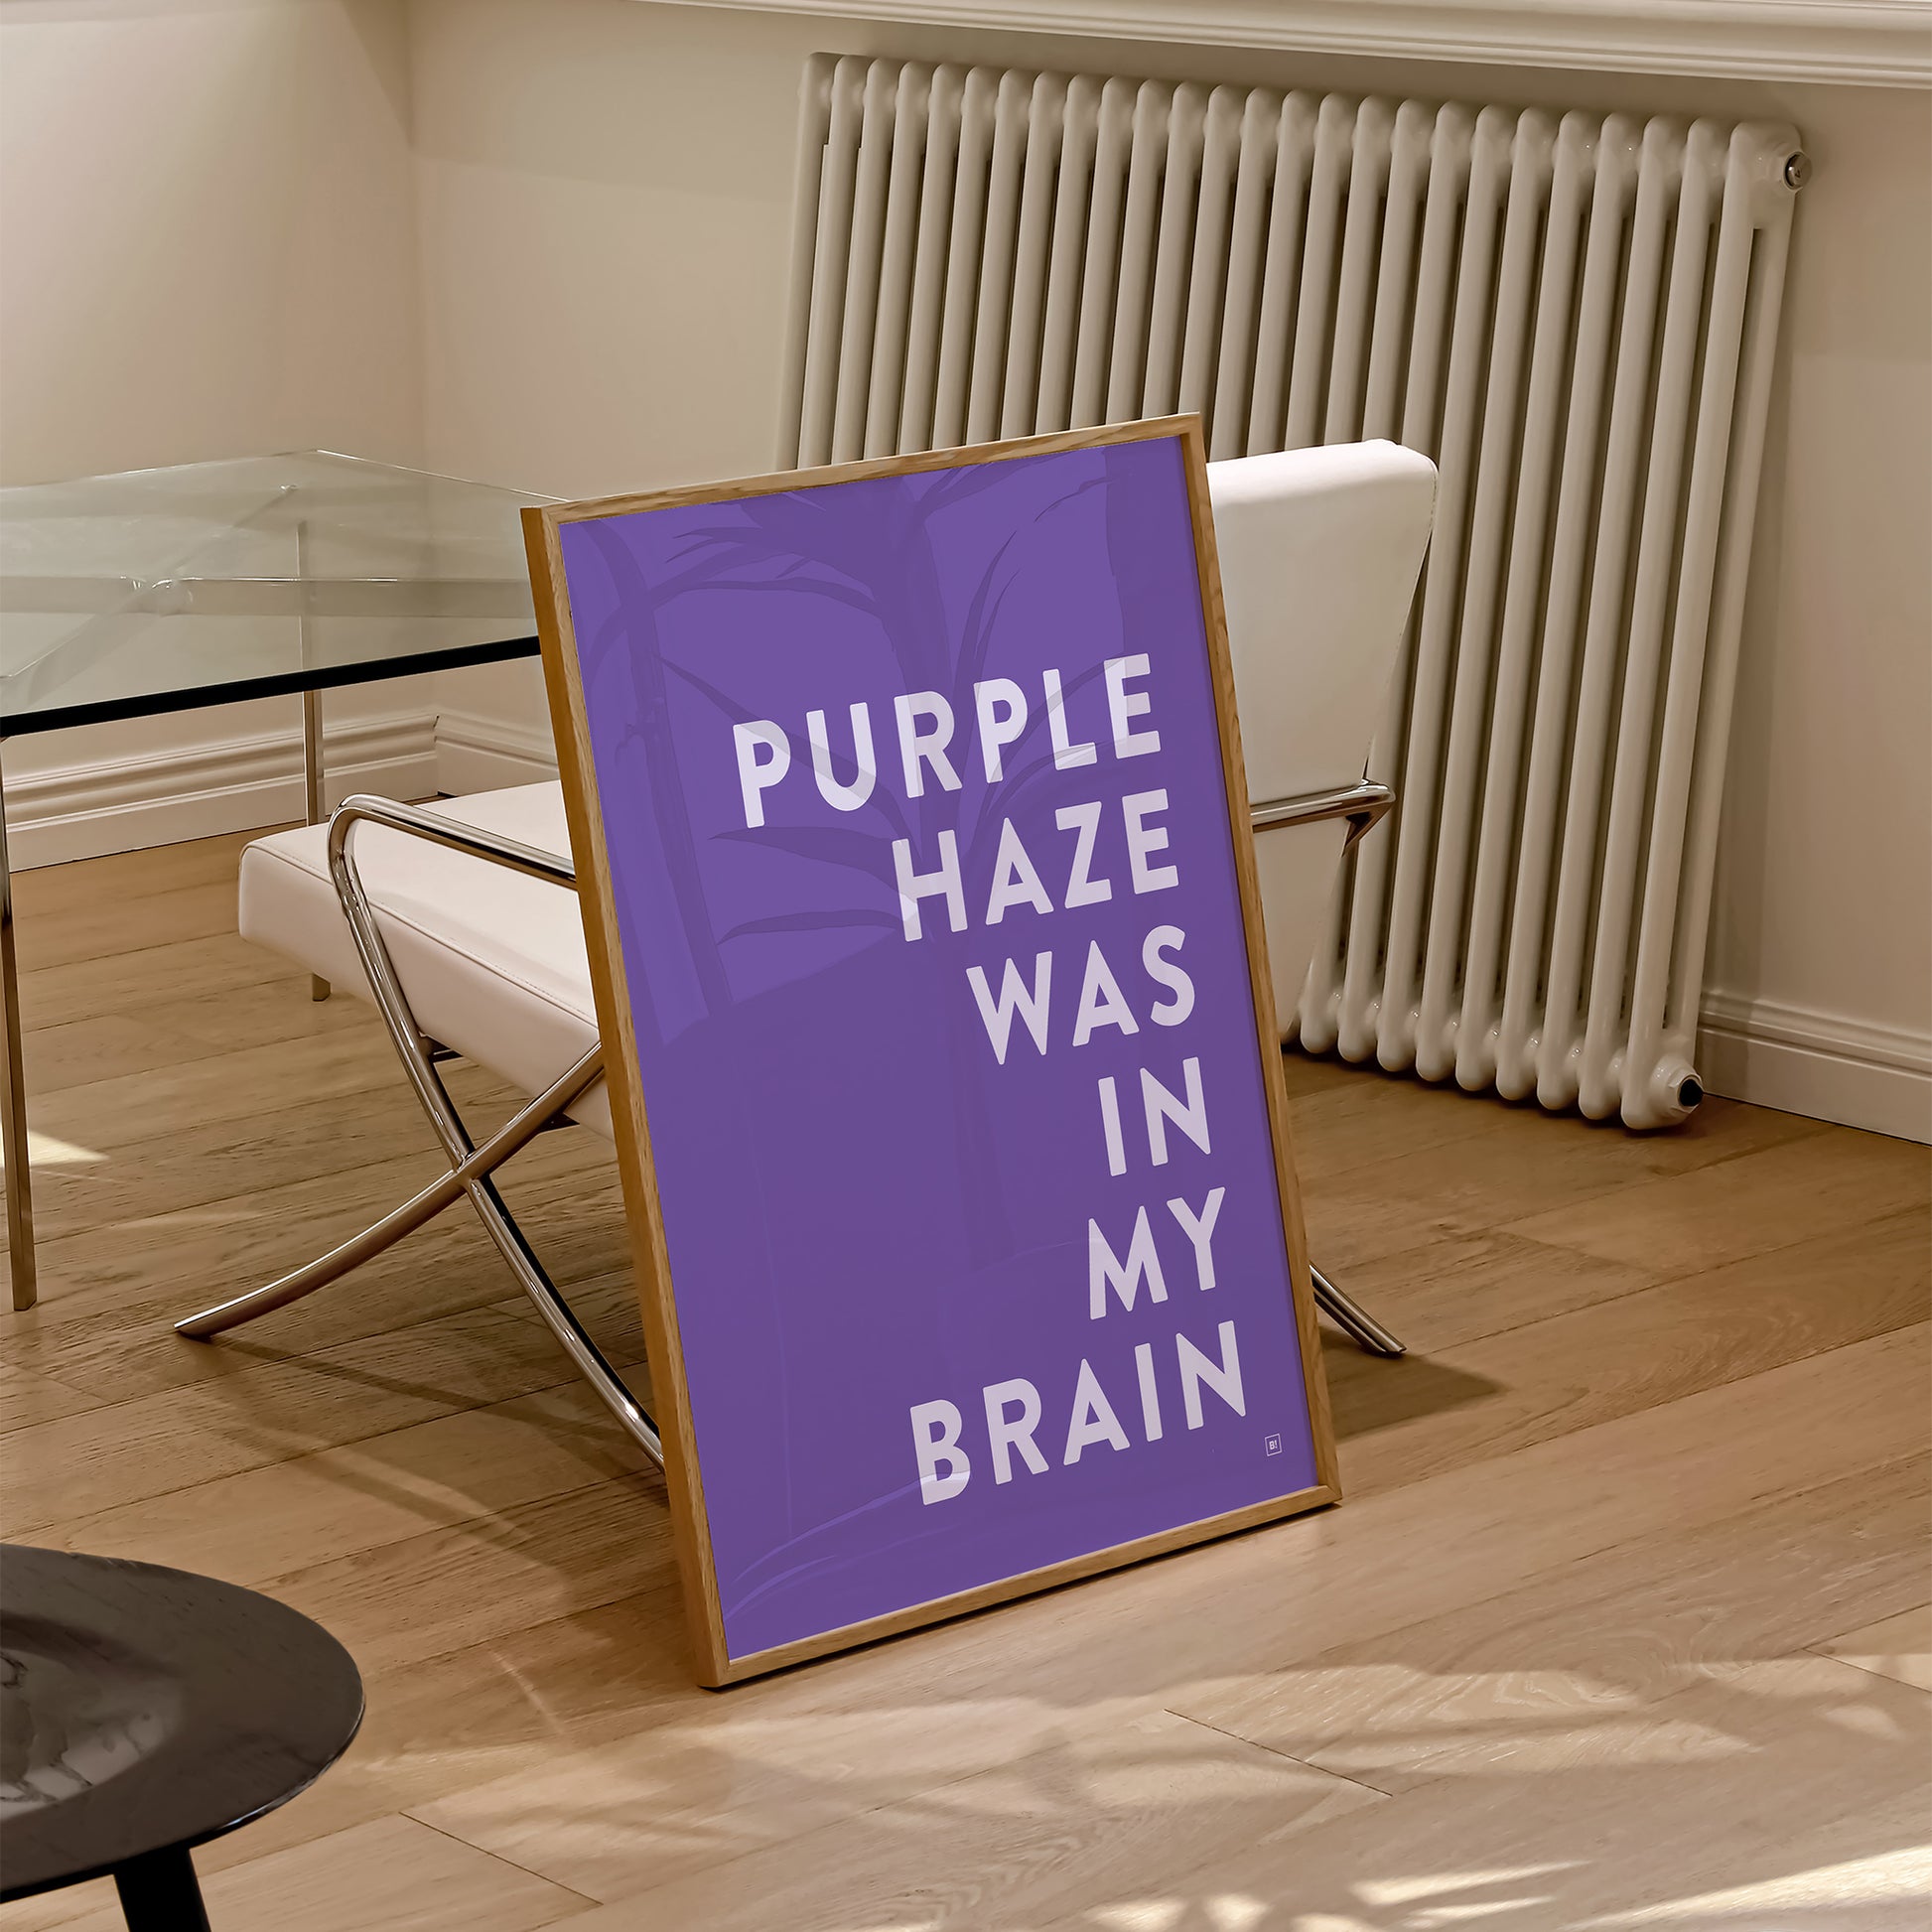 Be inspired by our Jimi Hendrix "Purple Haze Was In My Brain" lyric art print! This artwork was printed using the giclée process on archival acid-free paper and is presented in a natural oak frame, capturing its timeless beauty in every detail.